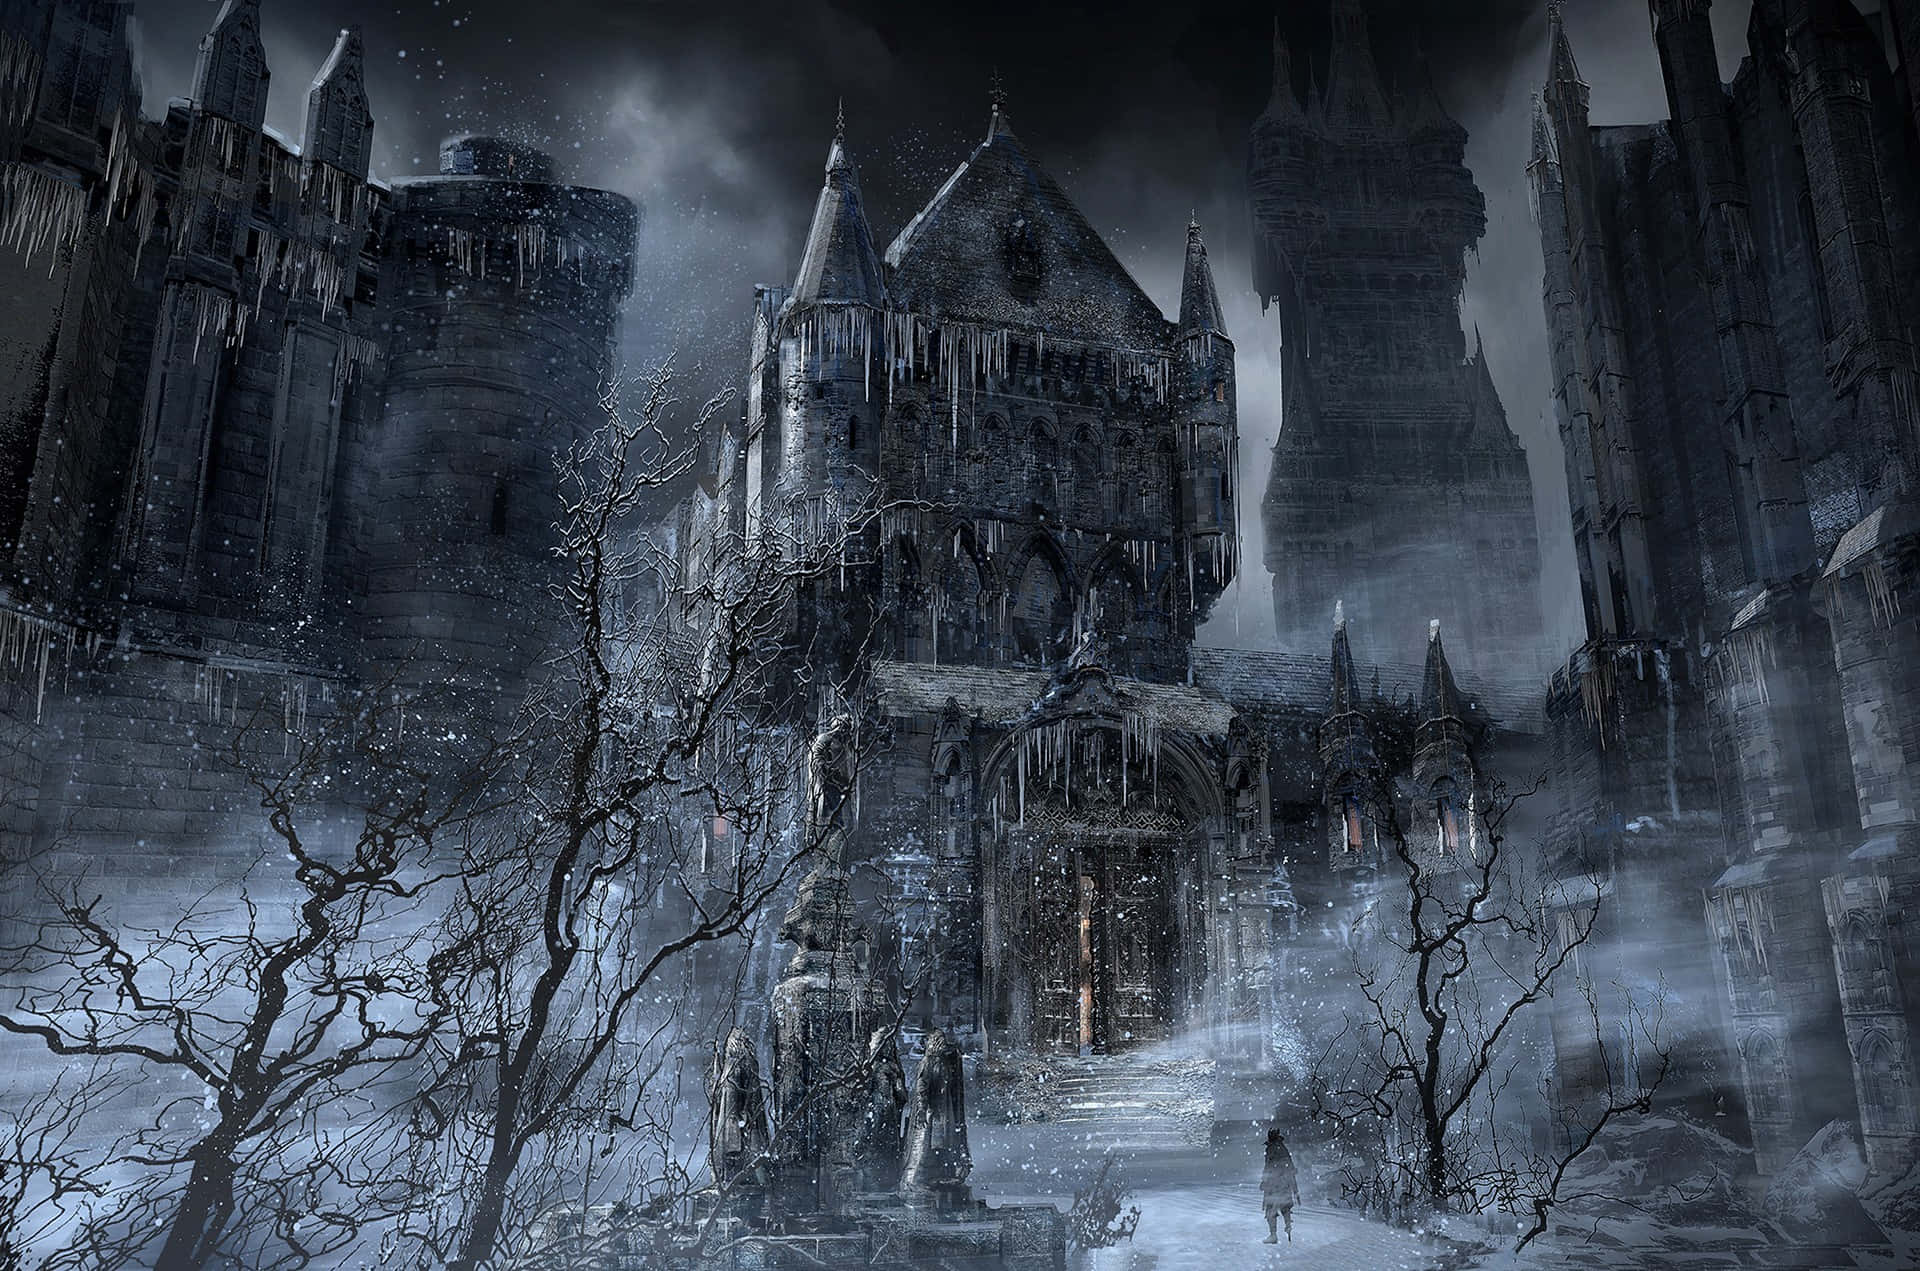 A fearsome hunter confronts a monstrous creature in the haunting world of Bloodborne.